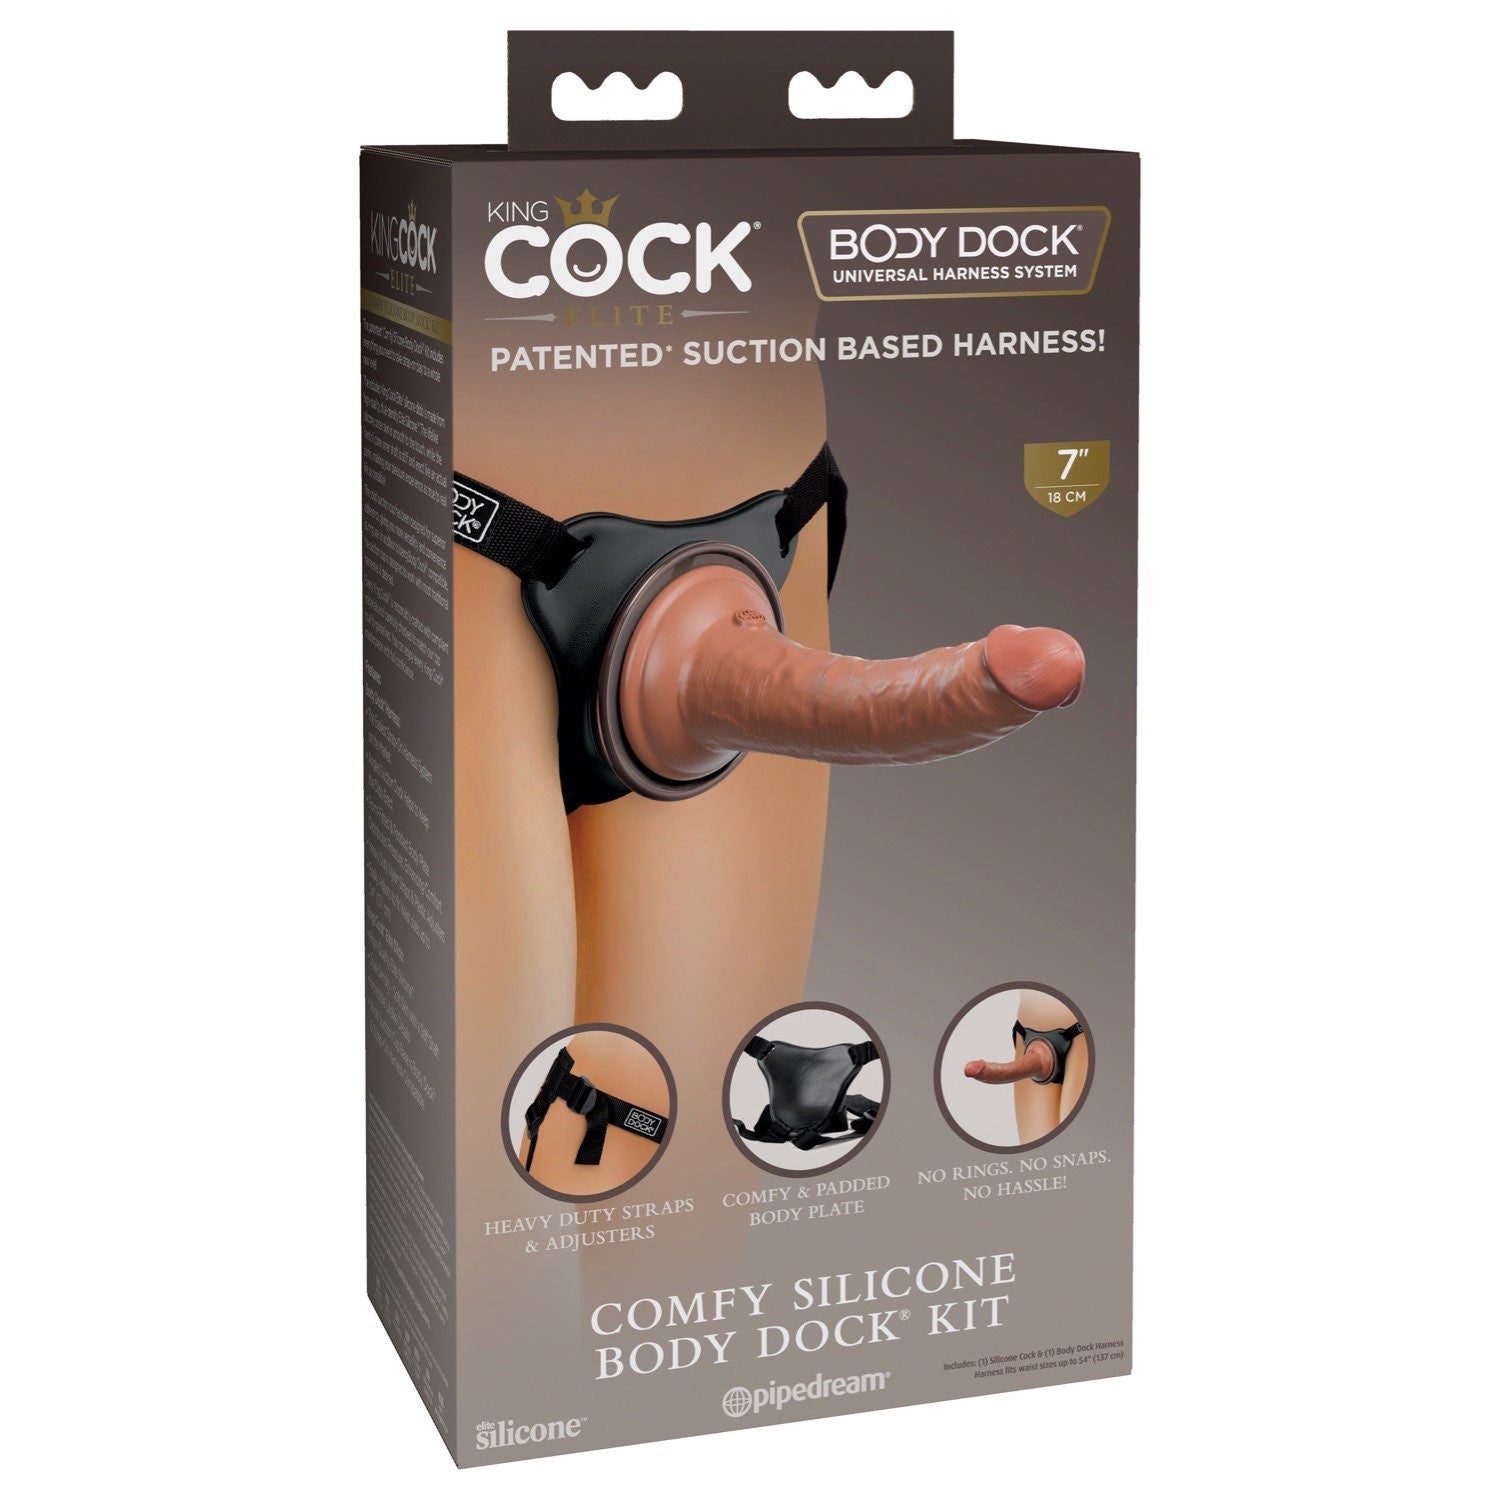 King Cock Elite Comfy Silicone Body Dock Kit - Body Dock Strap-On Harness with Tan 17.8 cm Dong by Pipedream